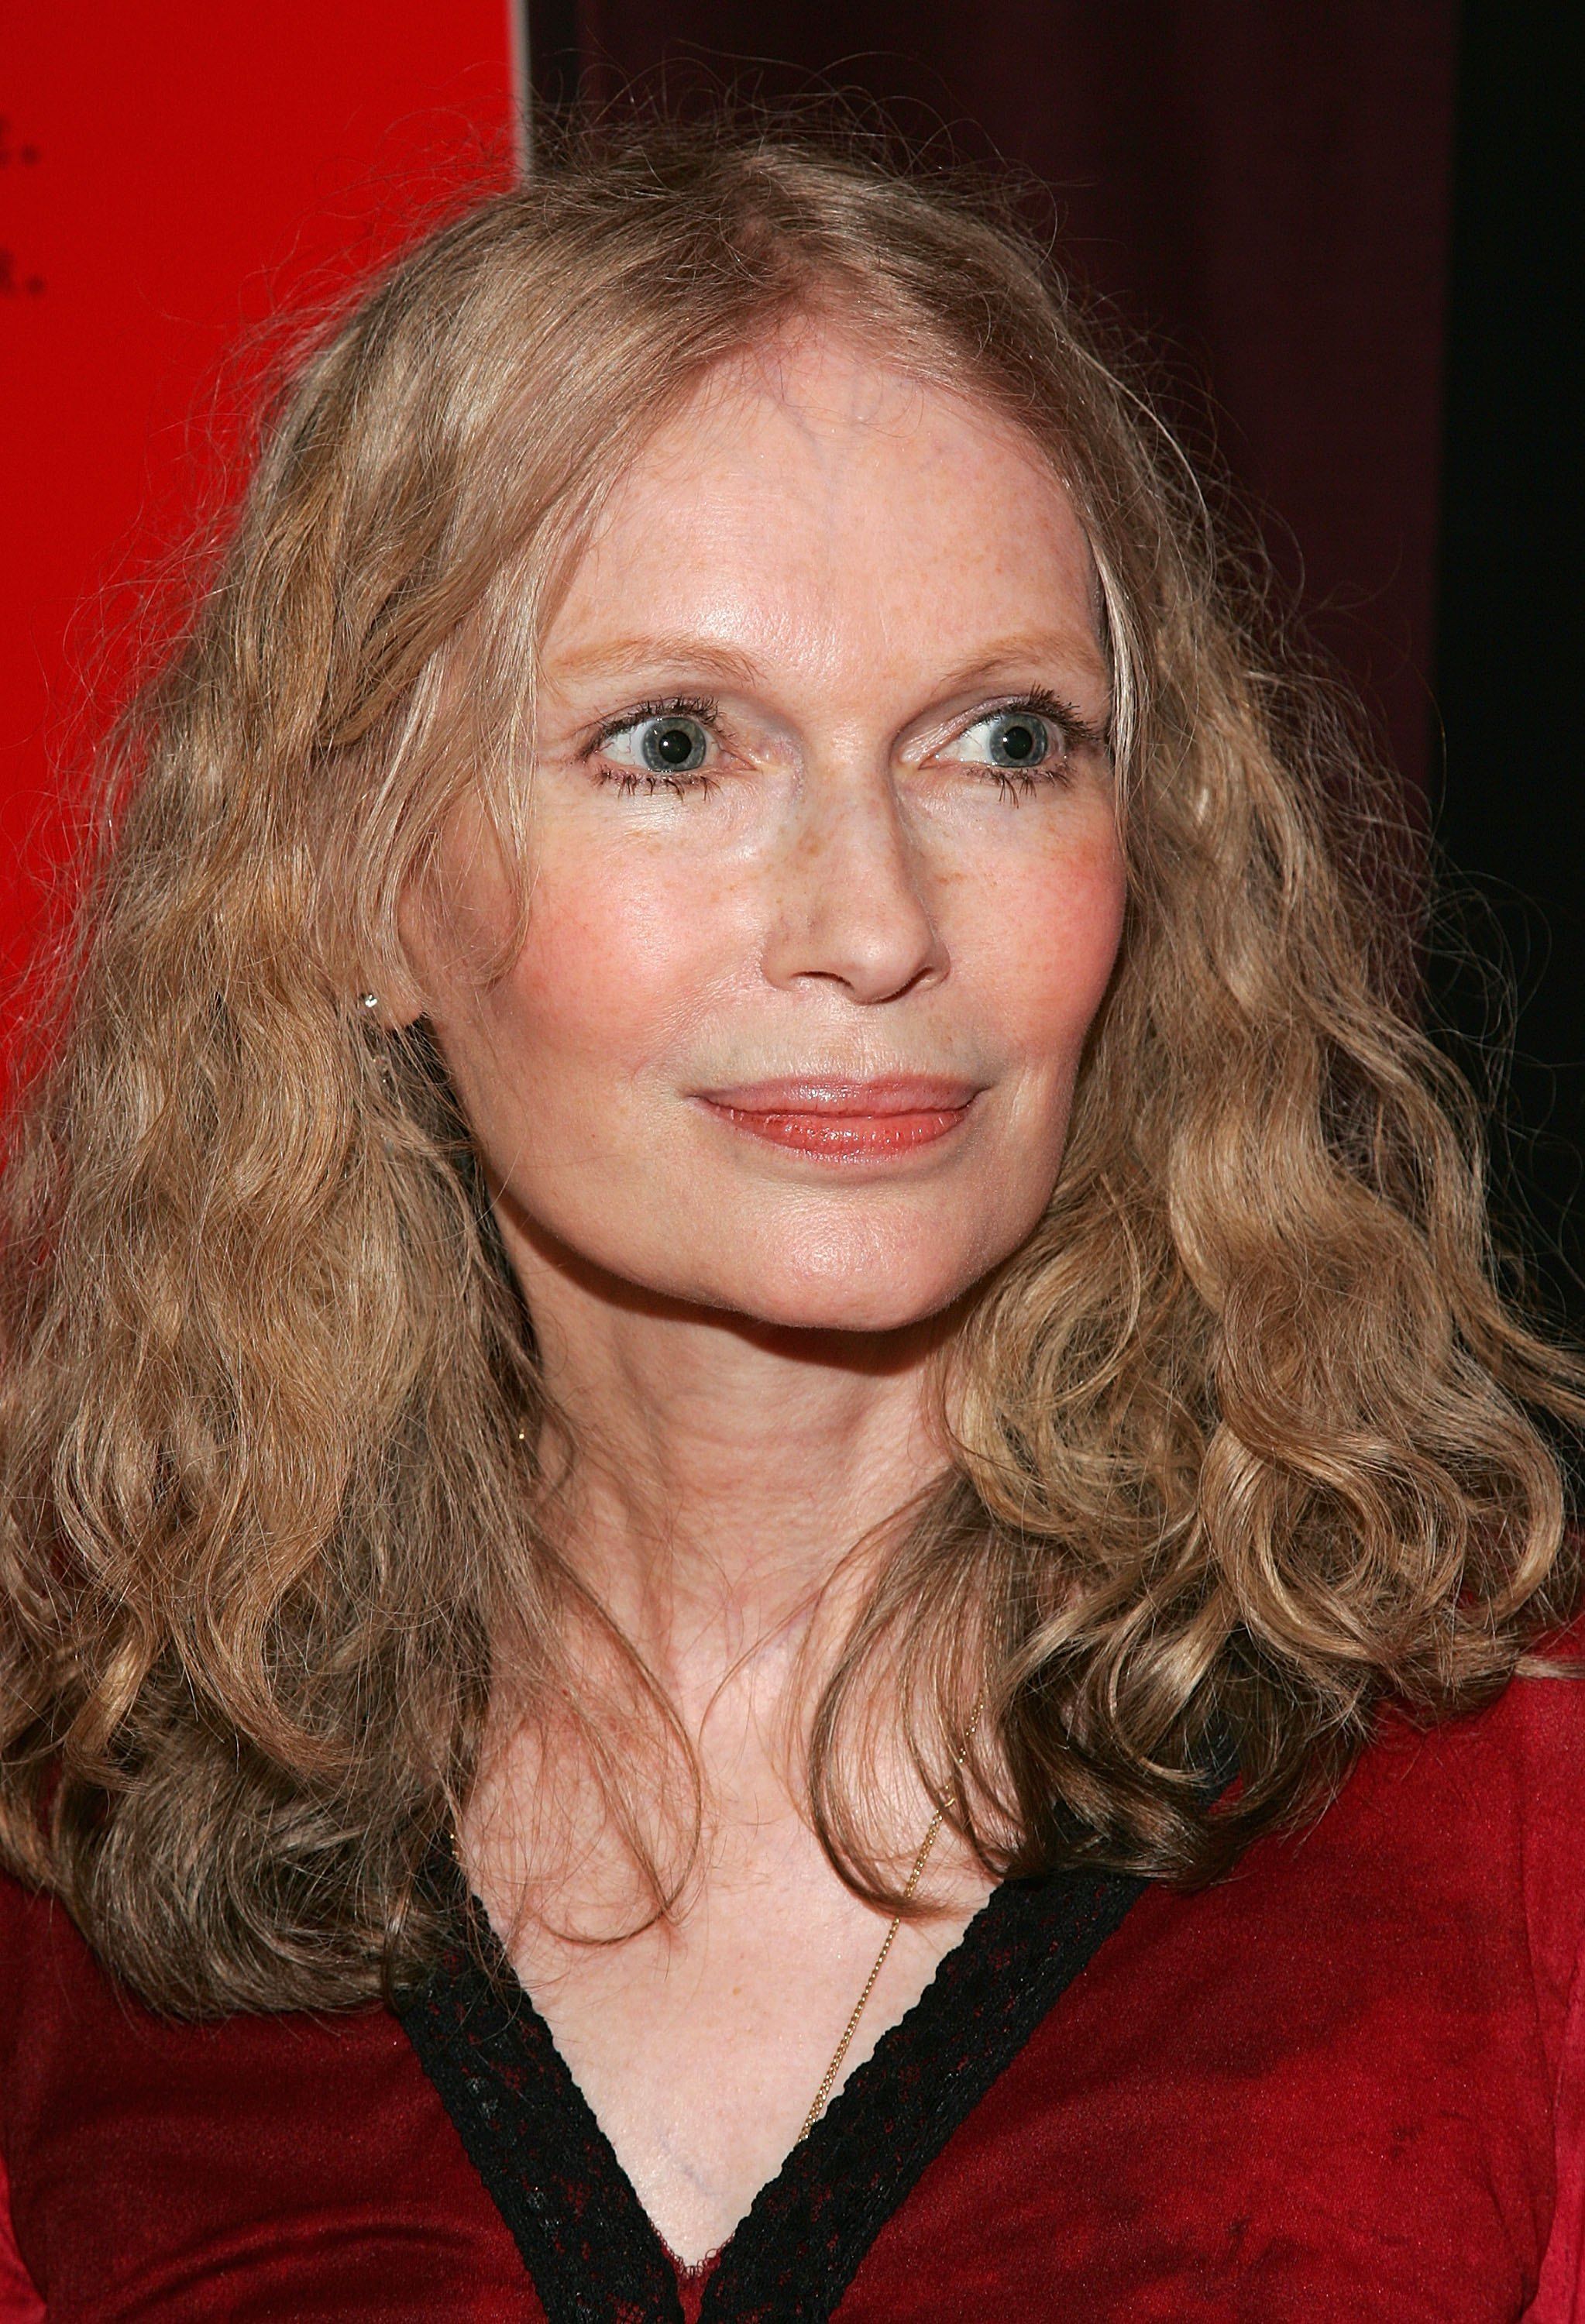 Actress Mia Farrow arrives at a screening of "The Omen" presented by the Cinema Society and DKNY Jeans at the Angel Orensanz Foundation May 31, 2006 in New York City | Photo: Getty Images